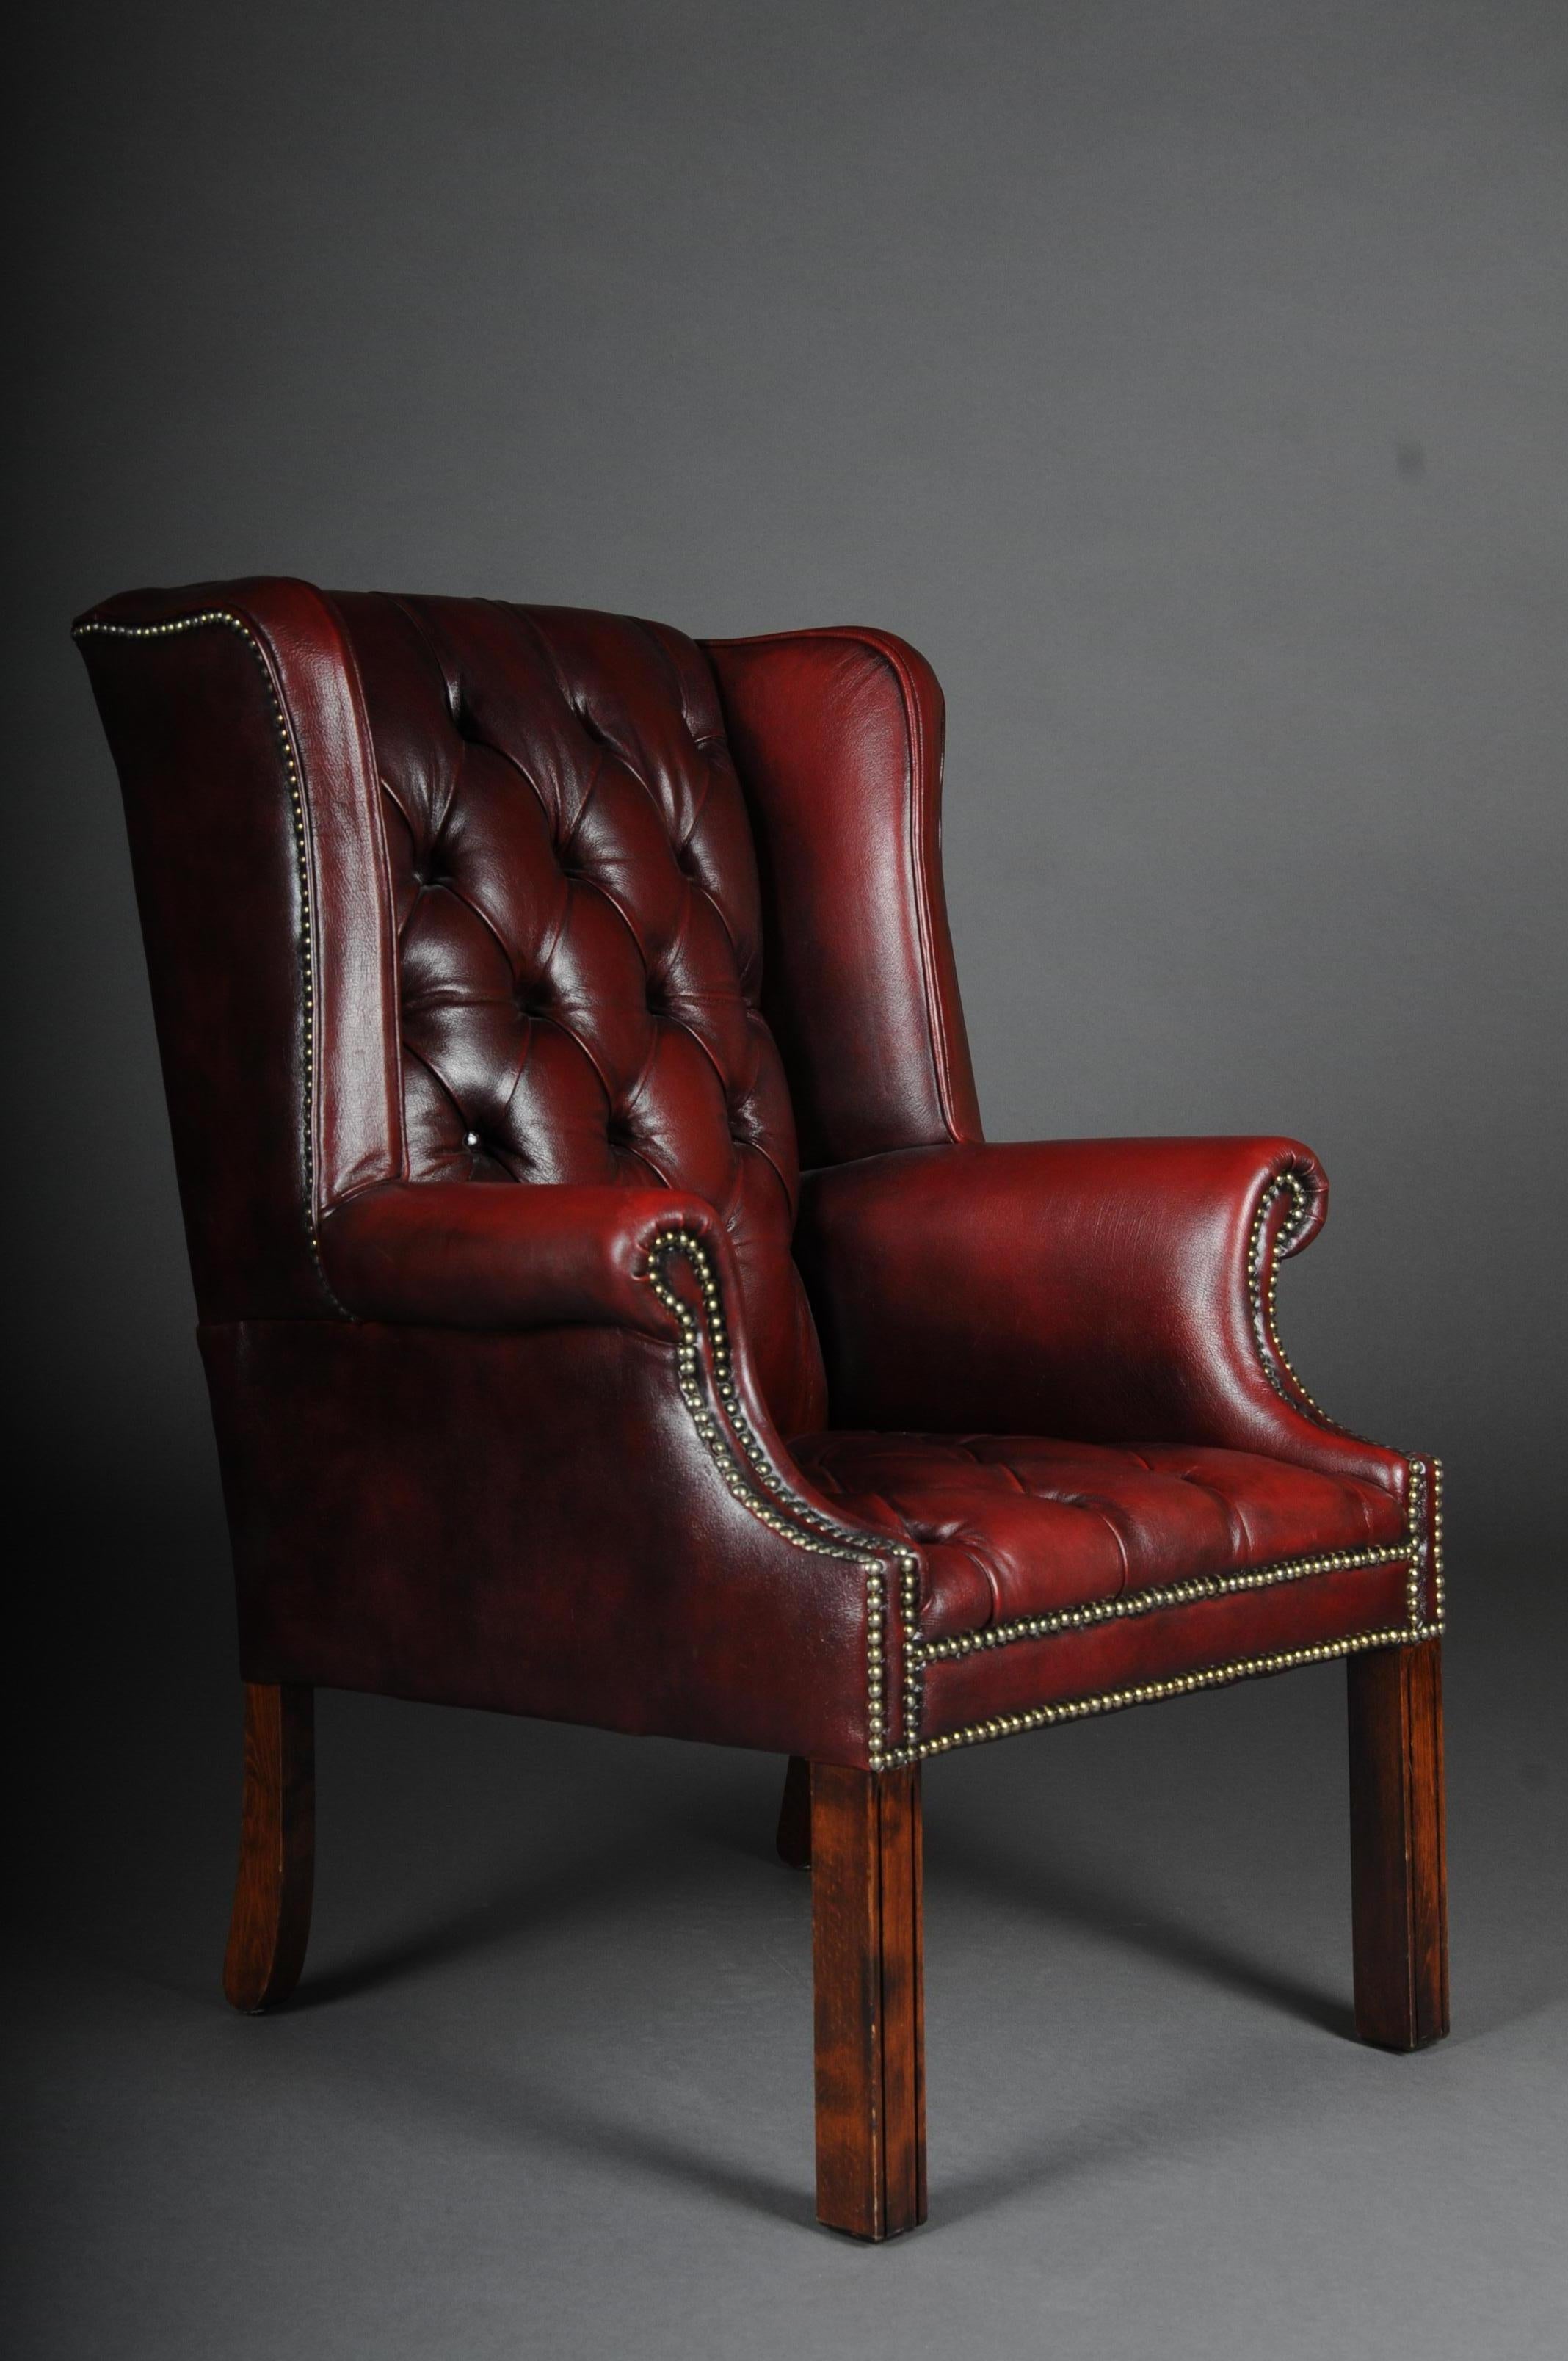 20th century Classic English Chesterfield Earsback chair, leather
mahogany stained wooden frame. Complete leather upholstery in Chesterfield. Classic shape and extremely comfortable, 20th century.

(B-167).
 